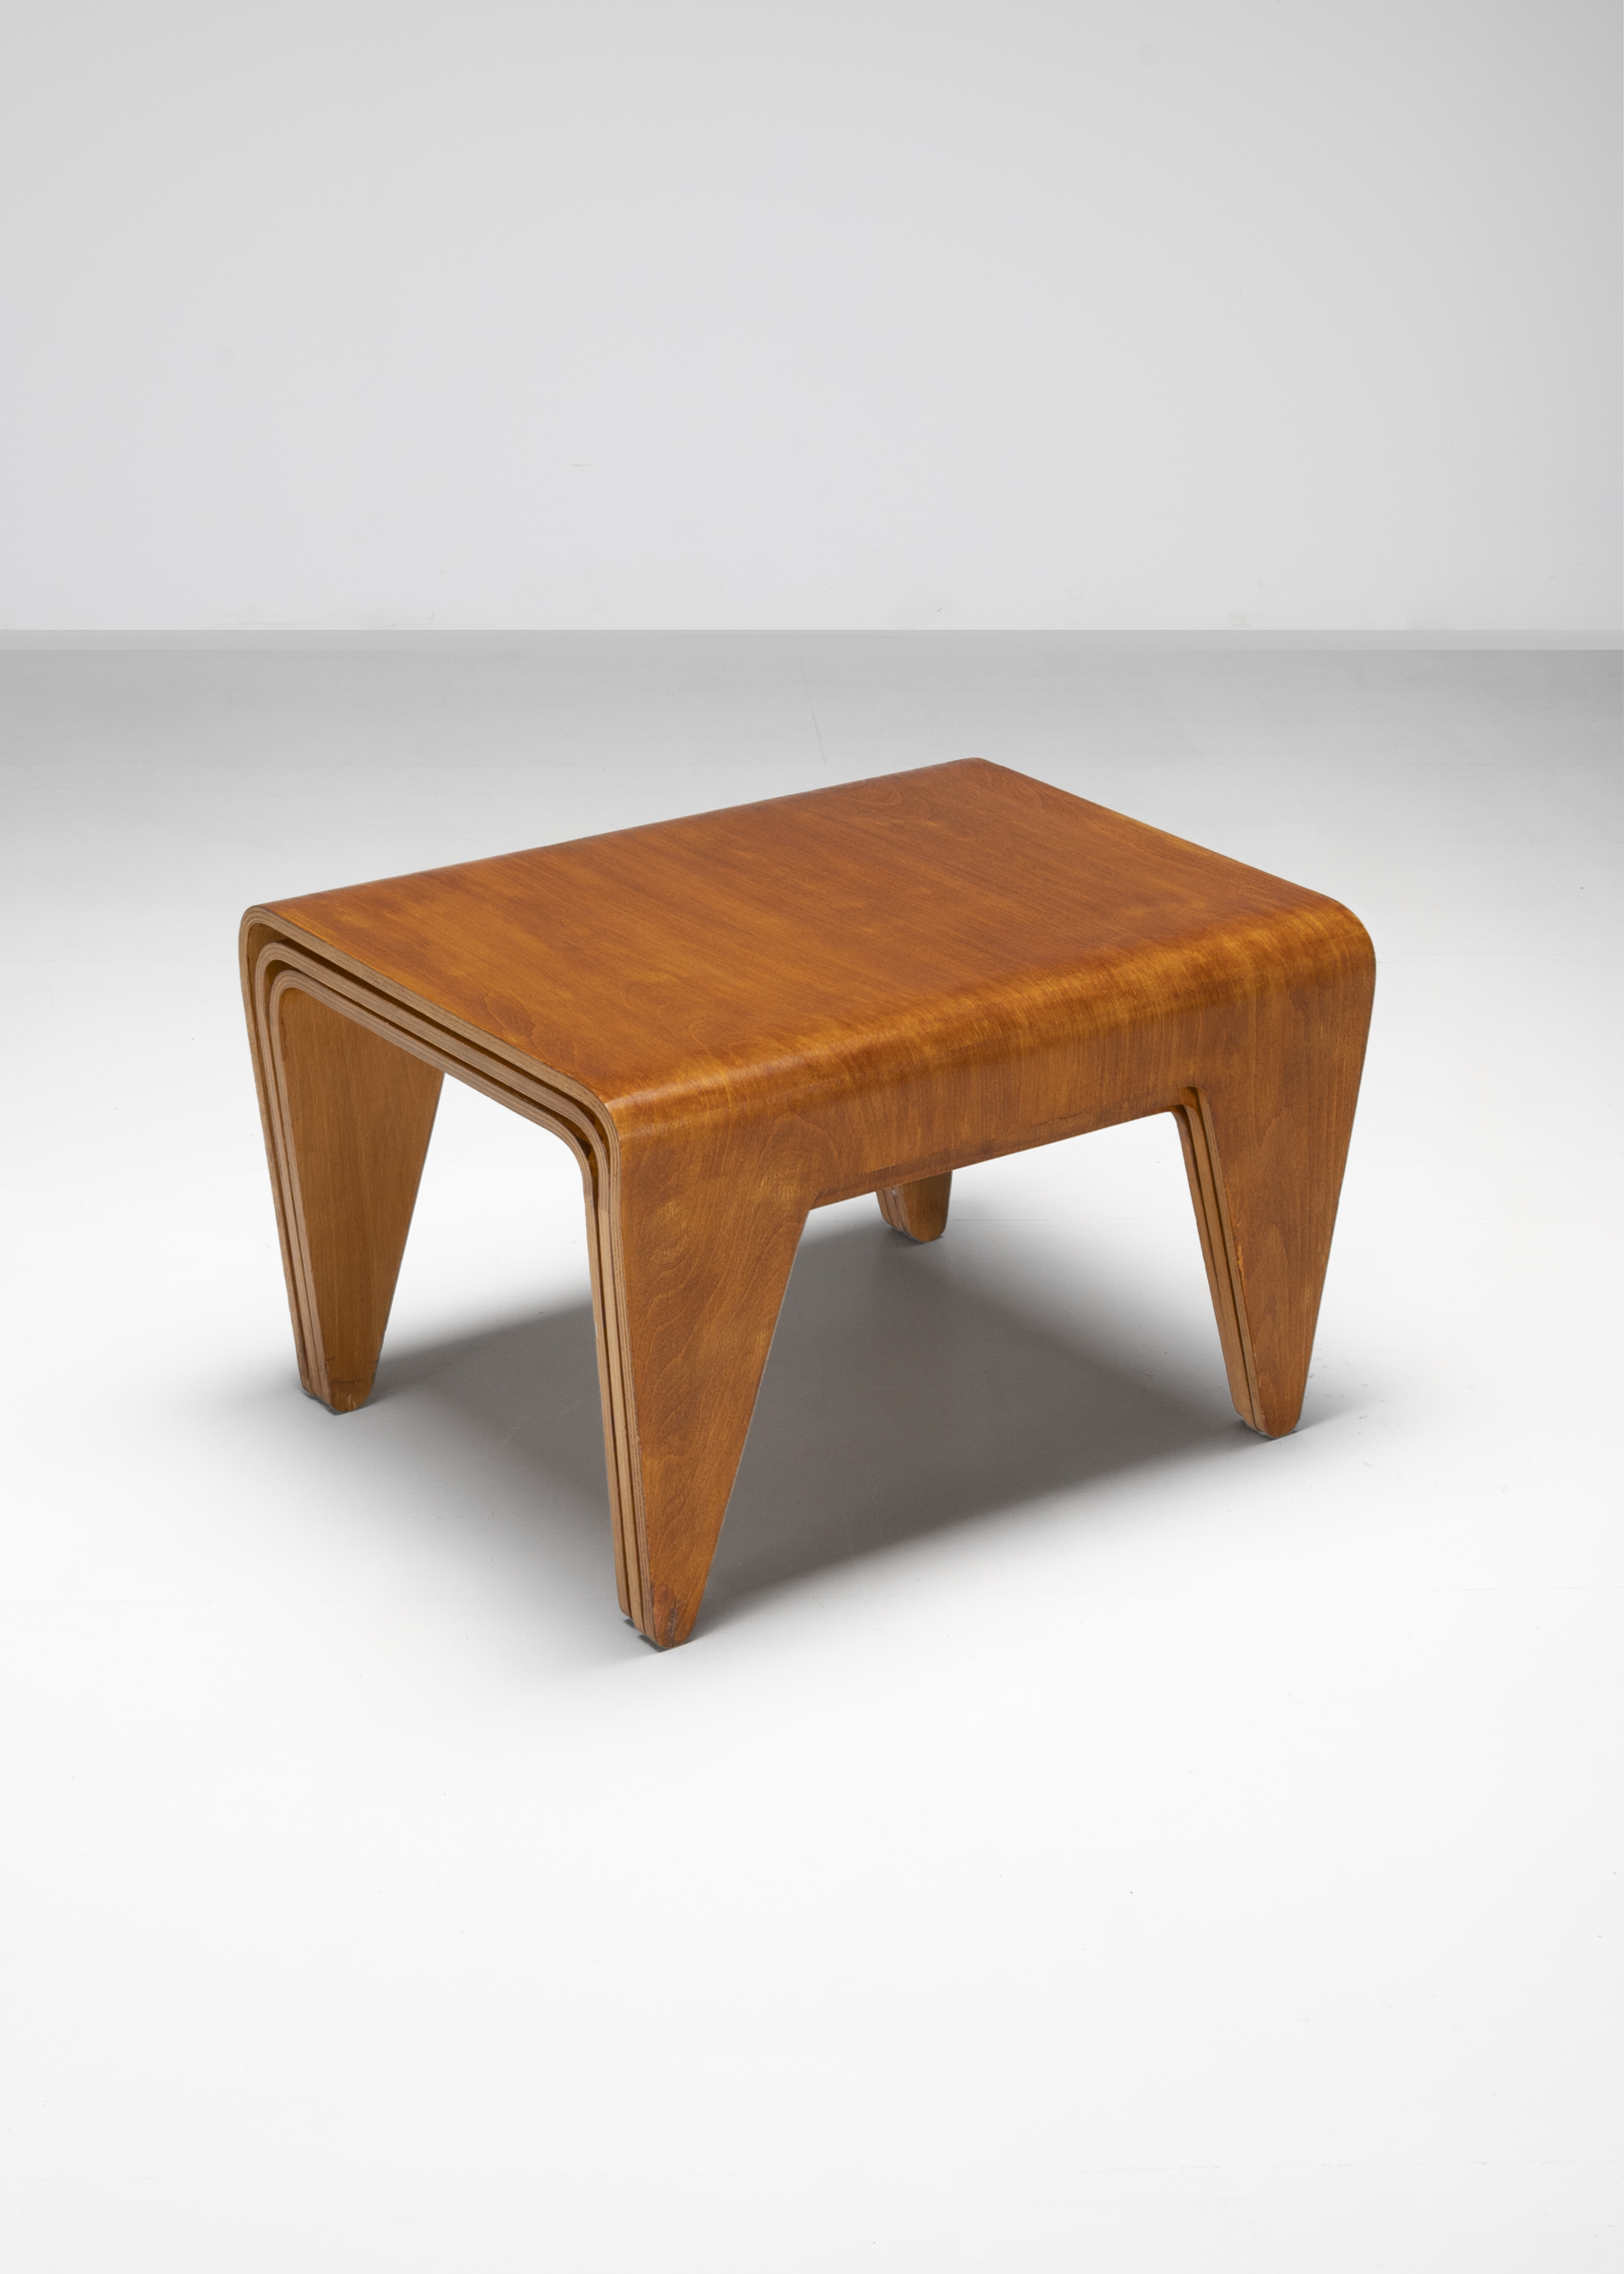 Marcel Breuer Early set of three nesting tables, designed 1936, produced circa 1936